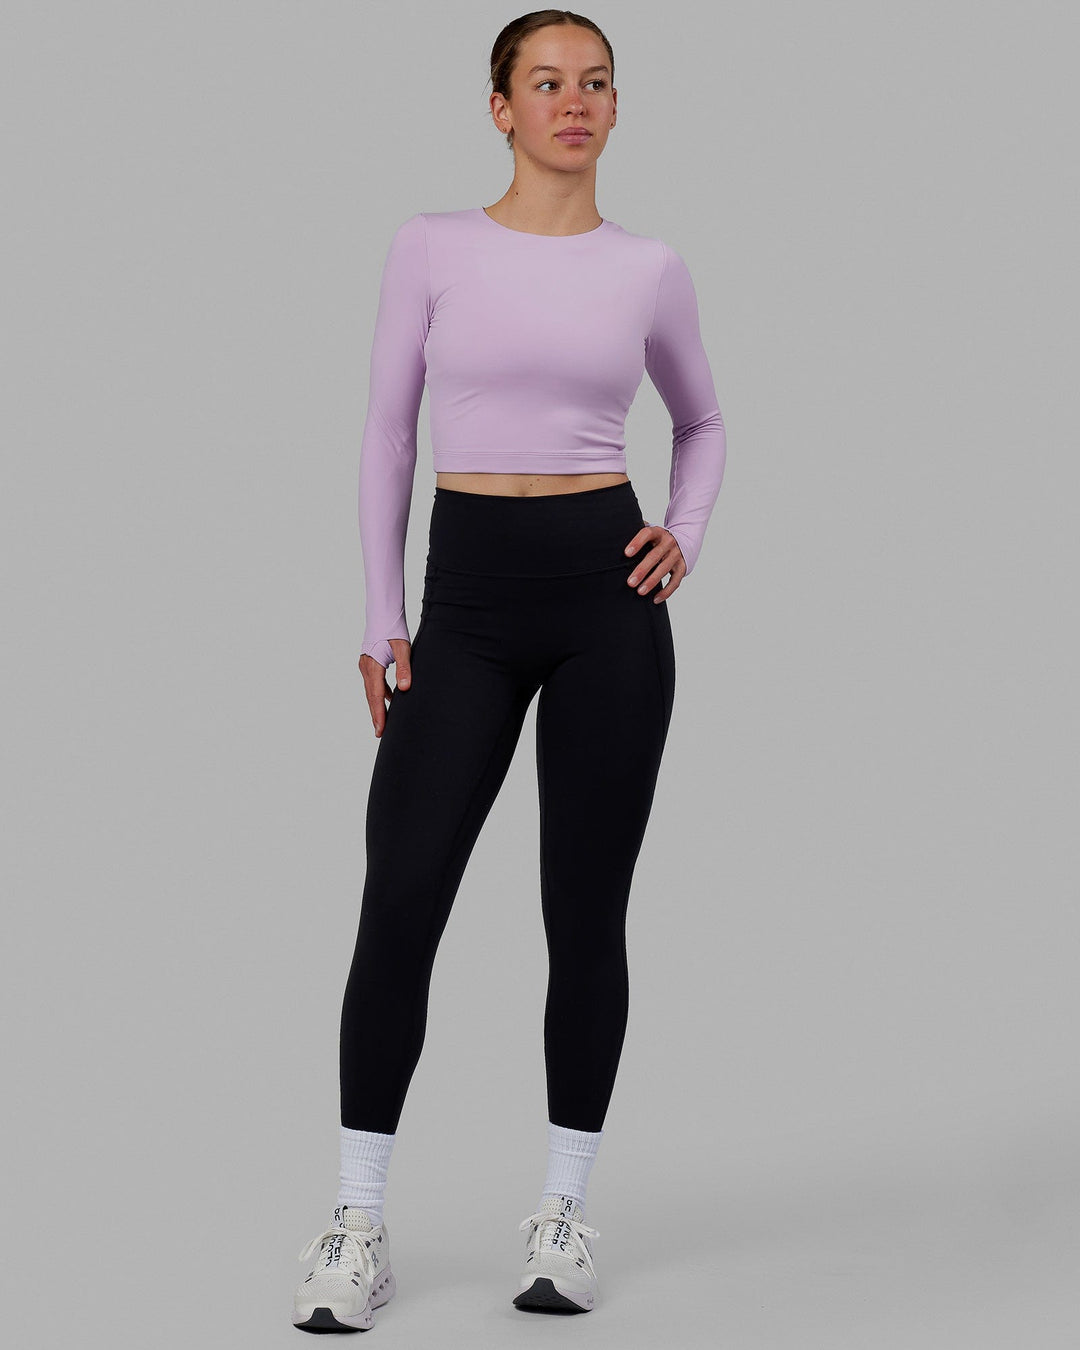 Staple LS Cropped Tee - Pale Lilac